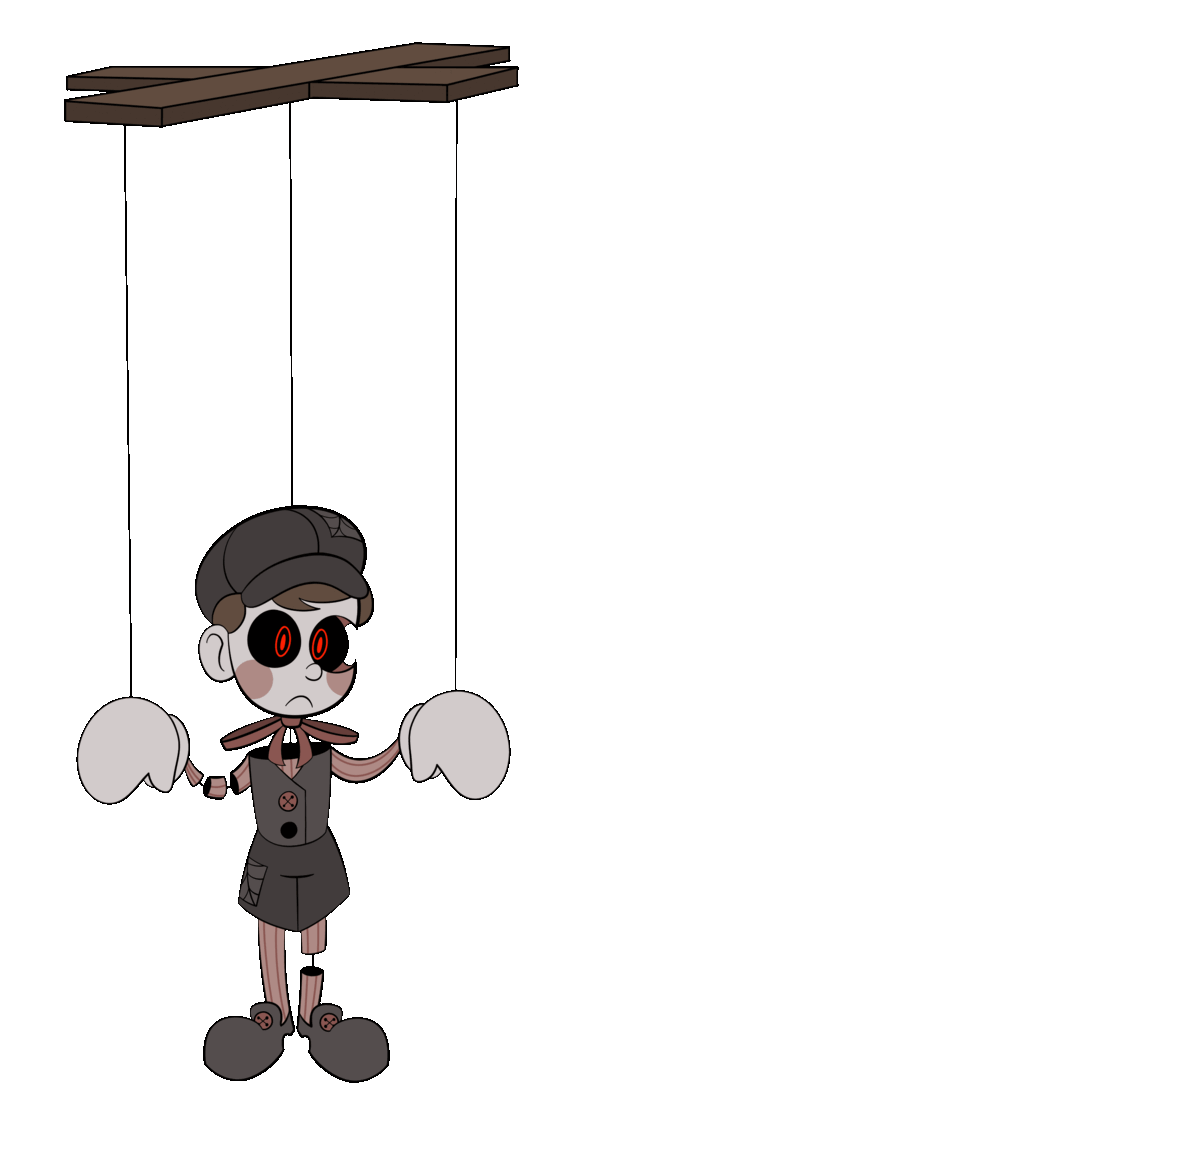 Puppet character spike attack animation.